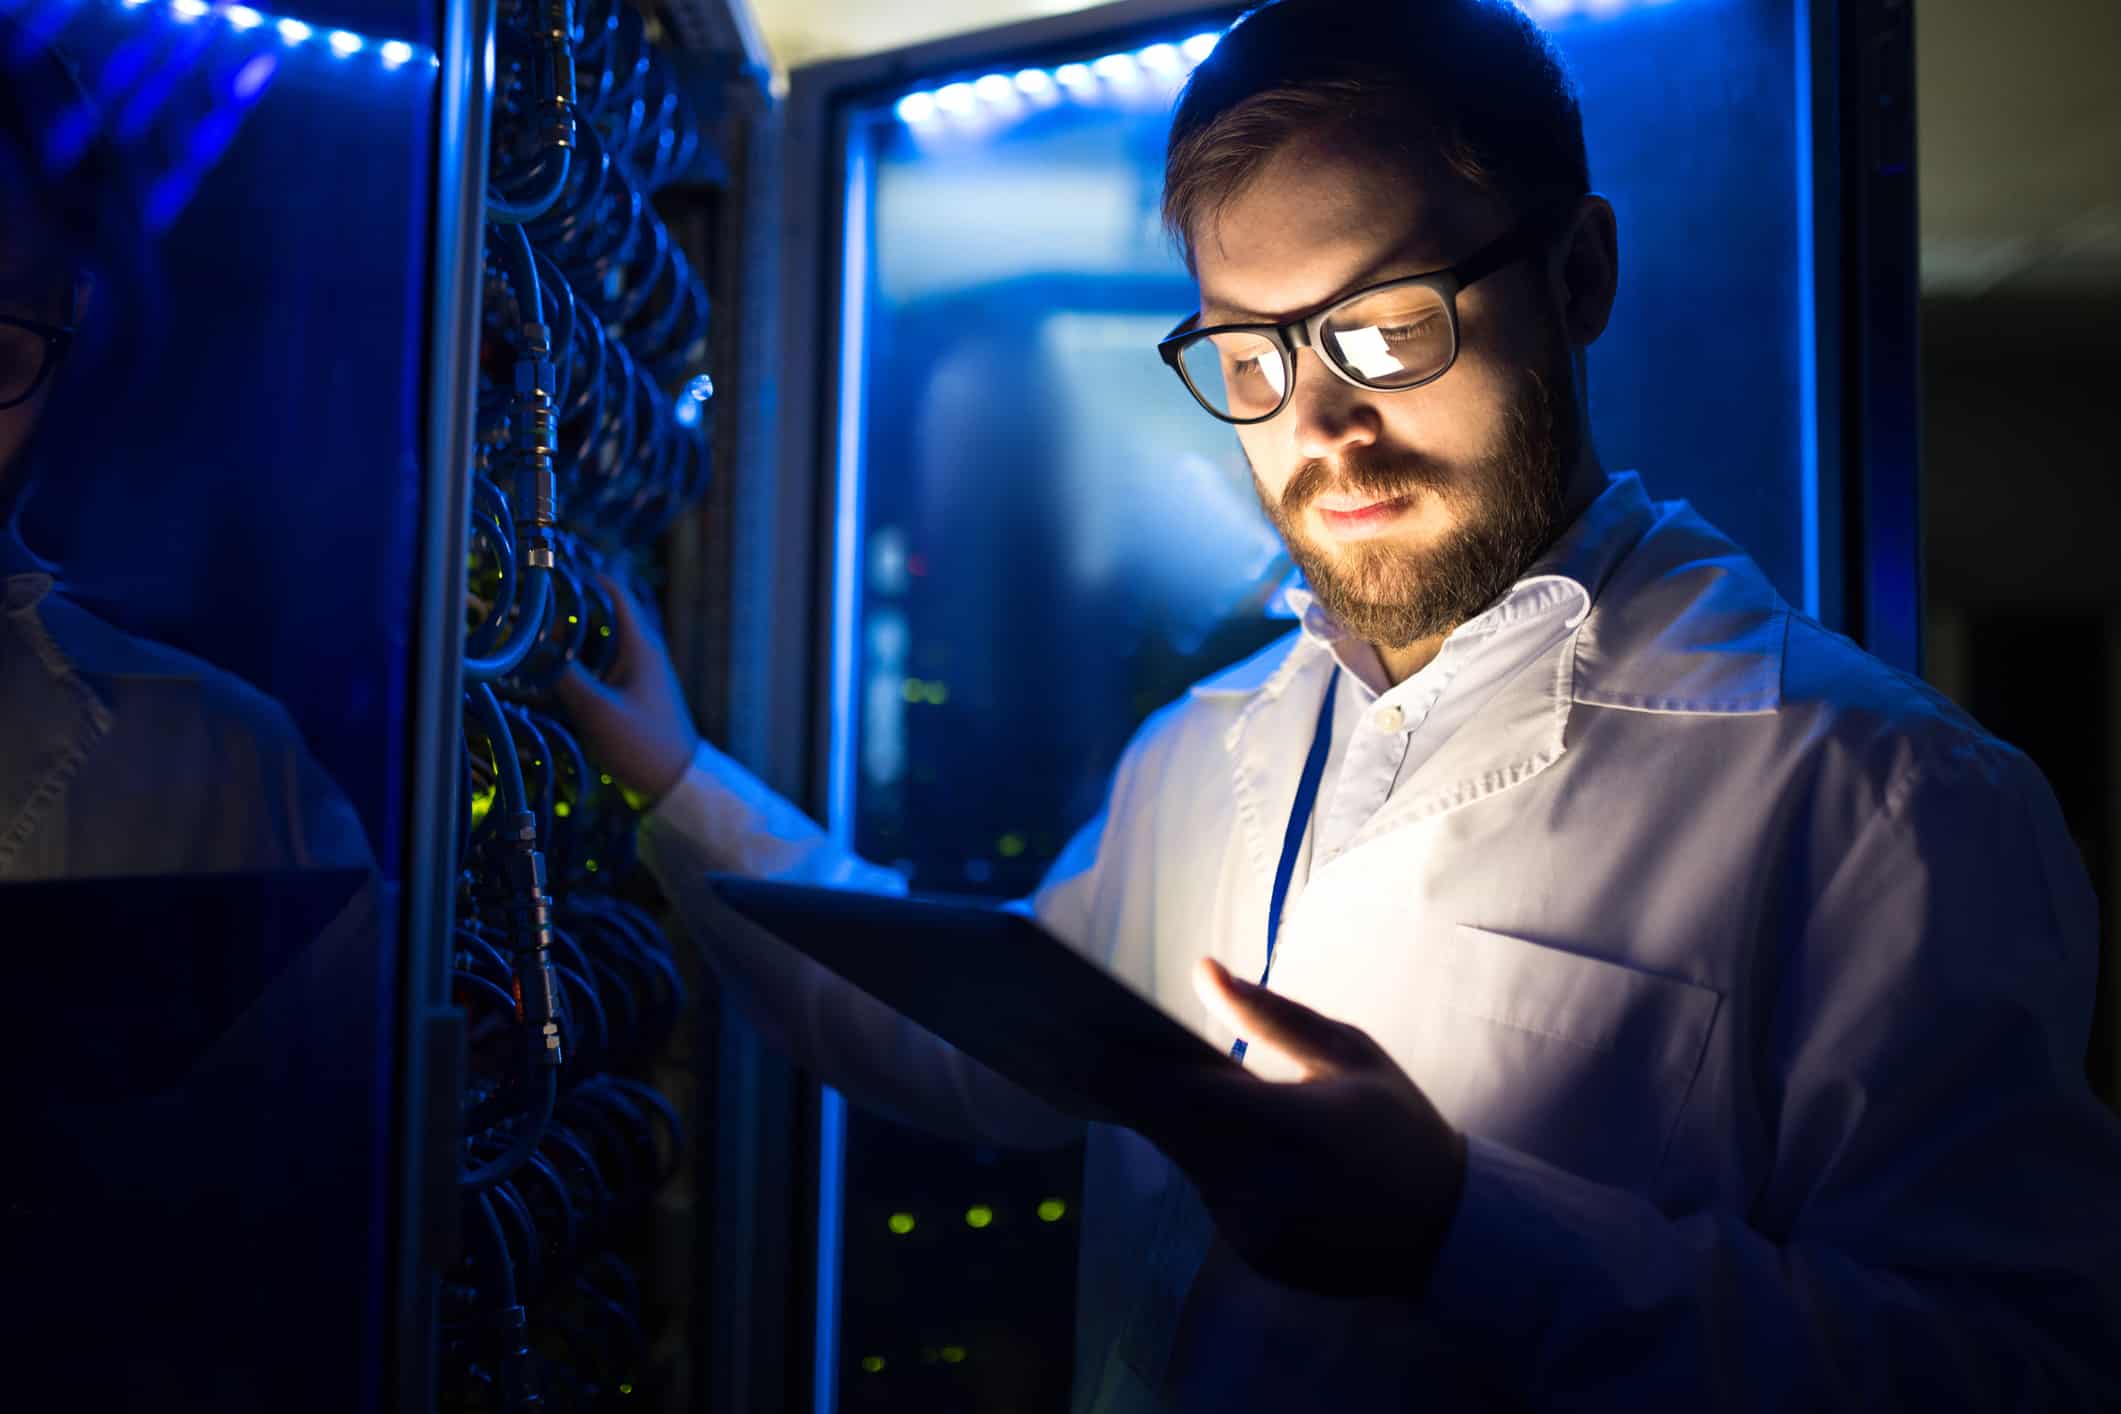 A young Tesserent technician stands in a dark computer server room looking at his ipad during a cybersecurity inspection